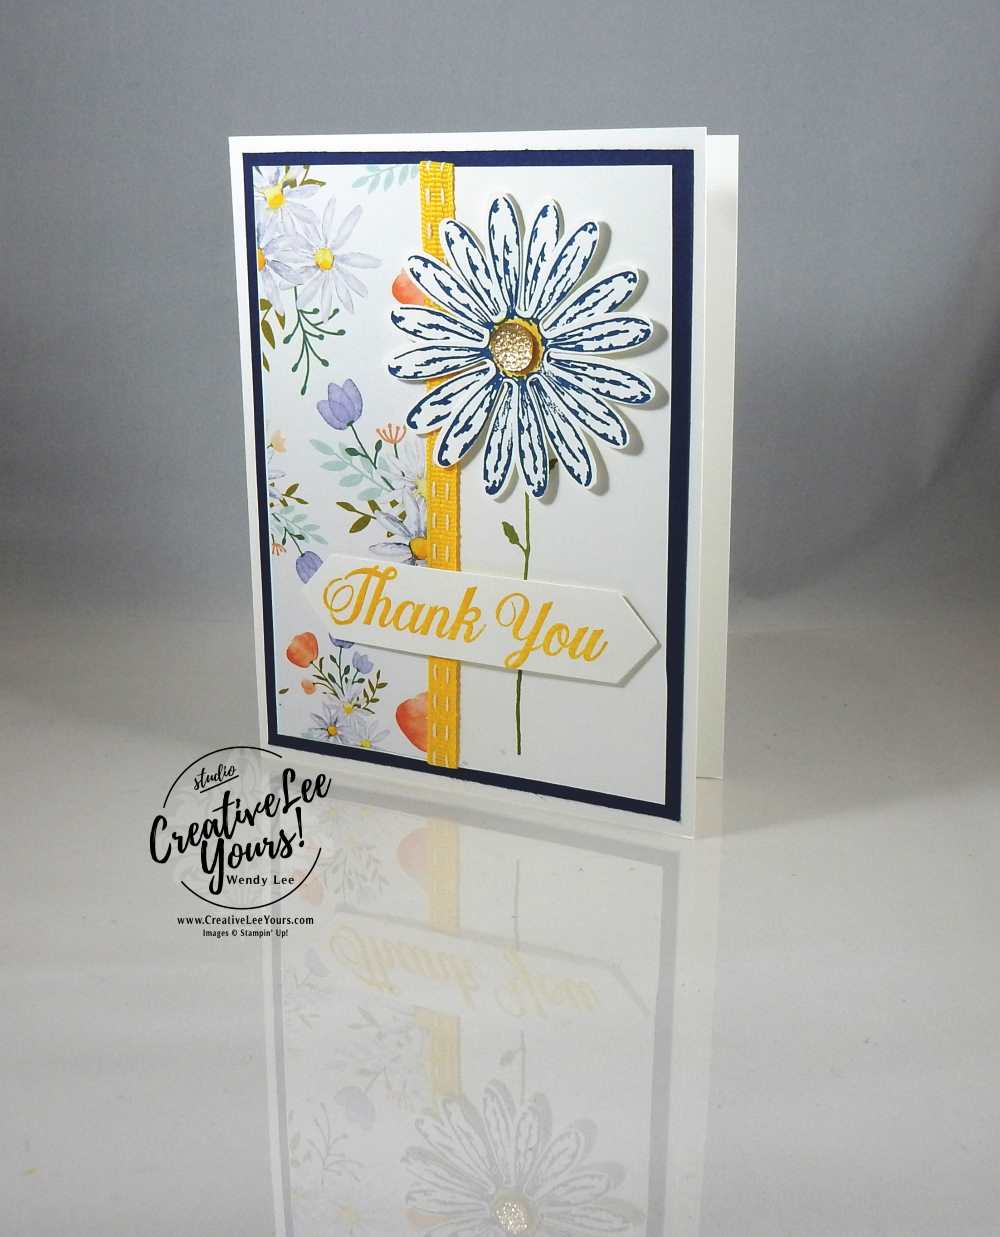 Daisy Thank You by Betsy Batten, Daisy Delight stamp set,daisy punch, diemond team swap, Stampin Up, handmade card, stamping,rubber stamps